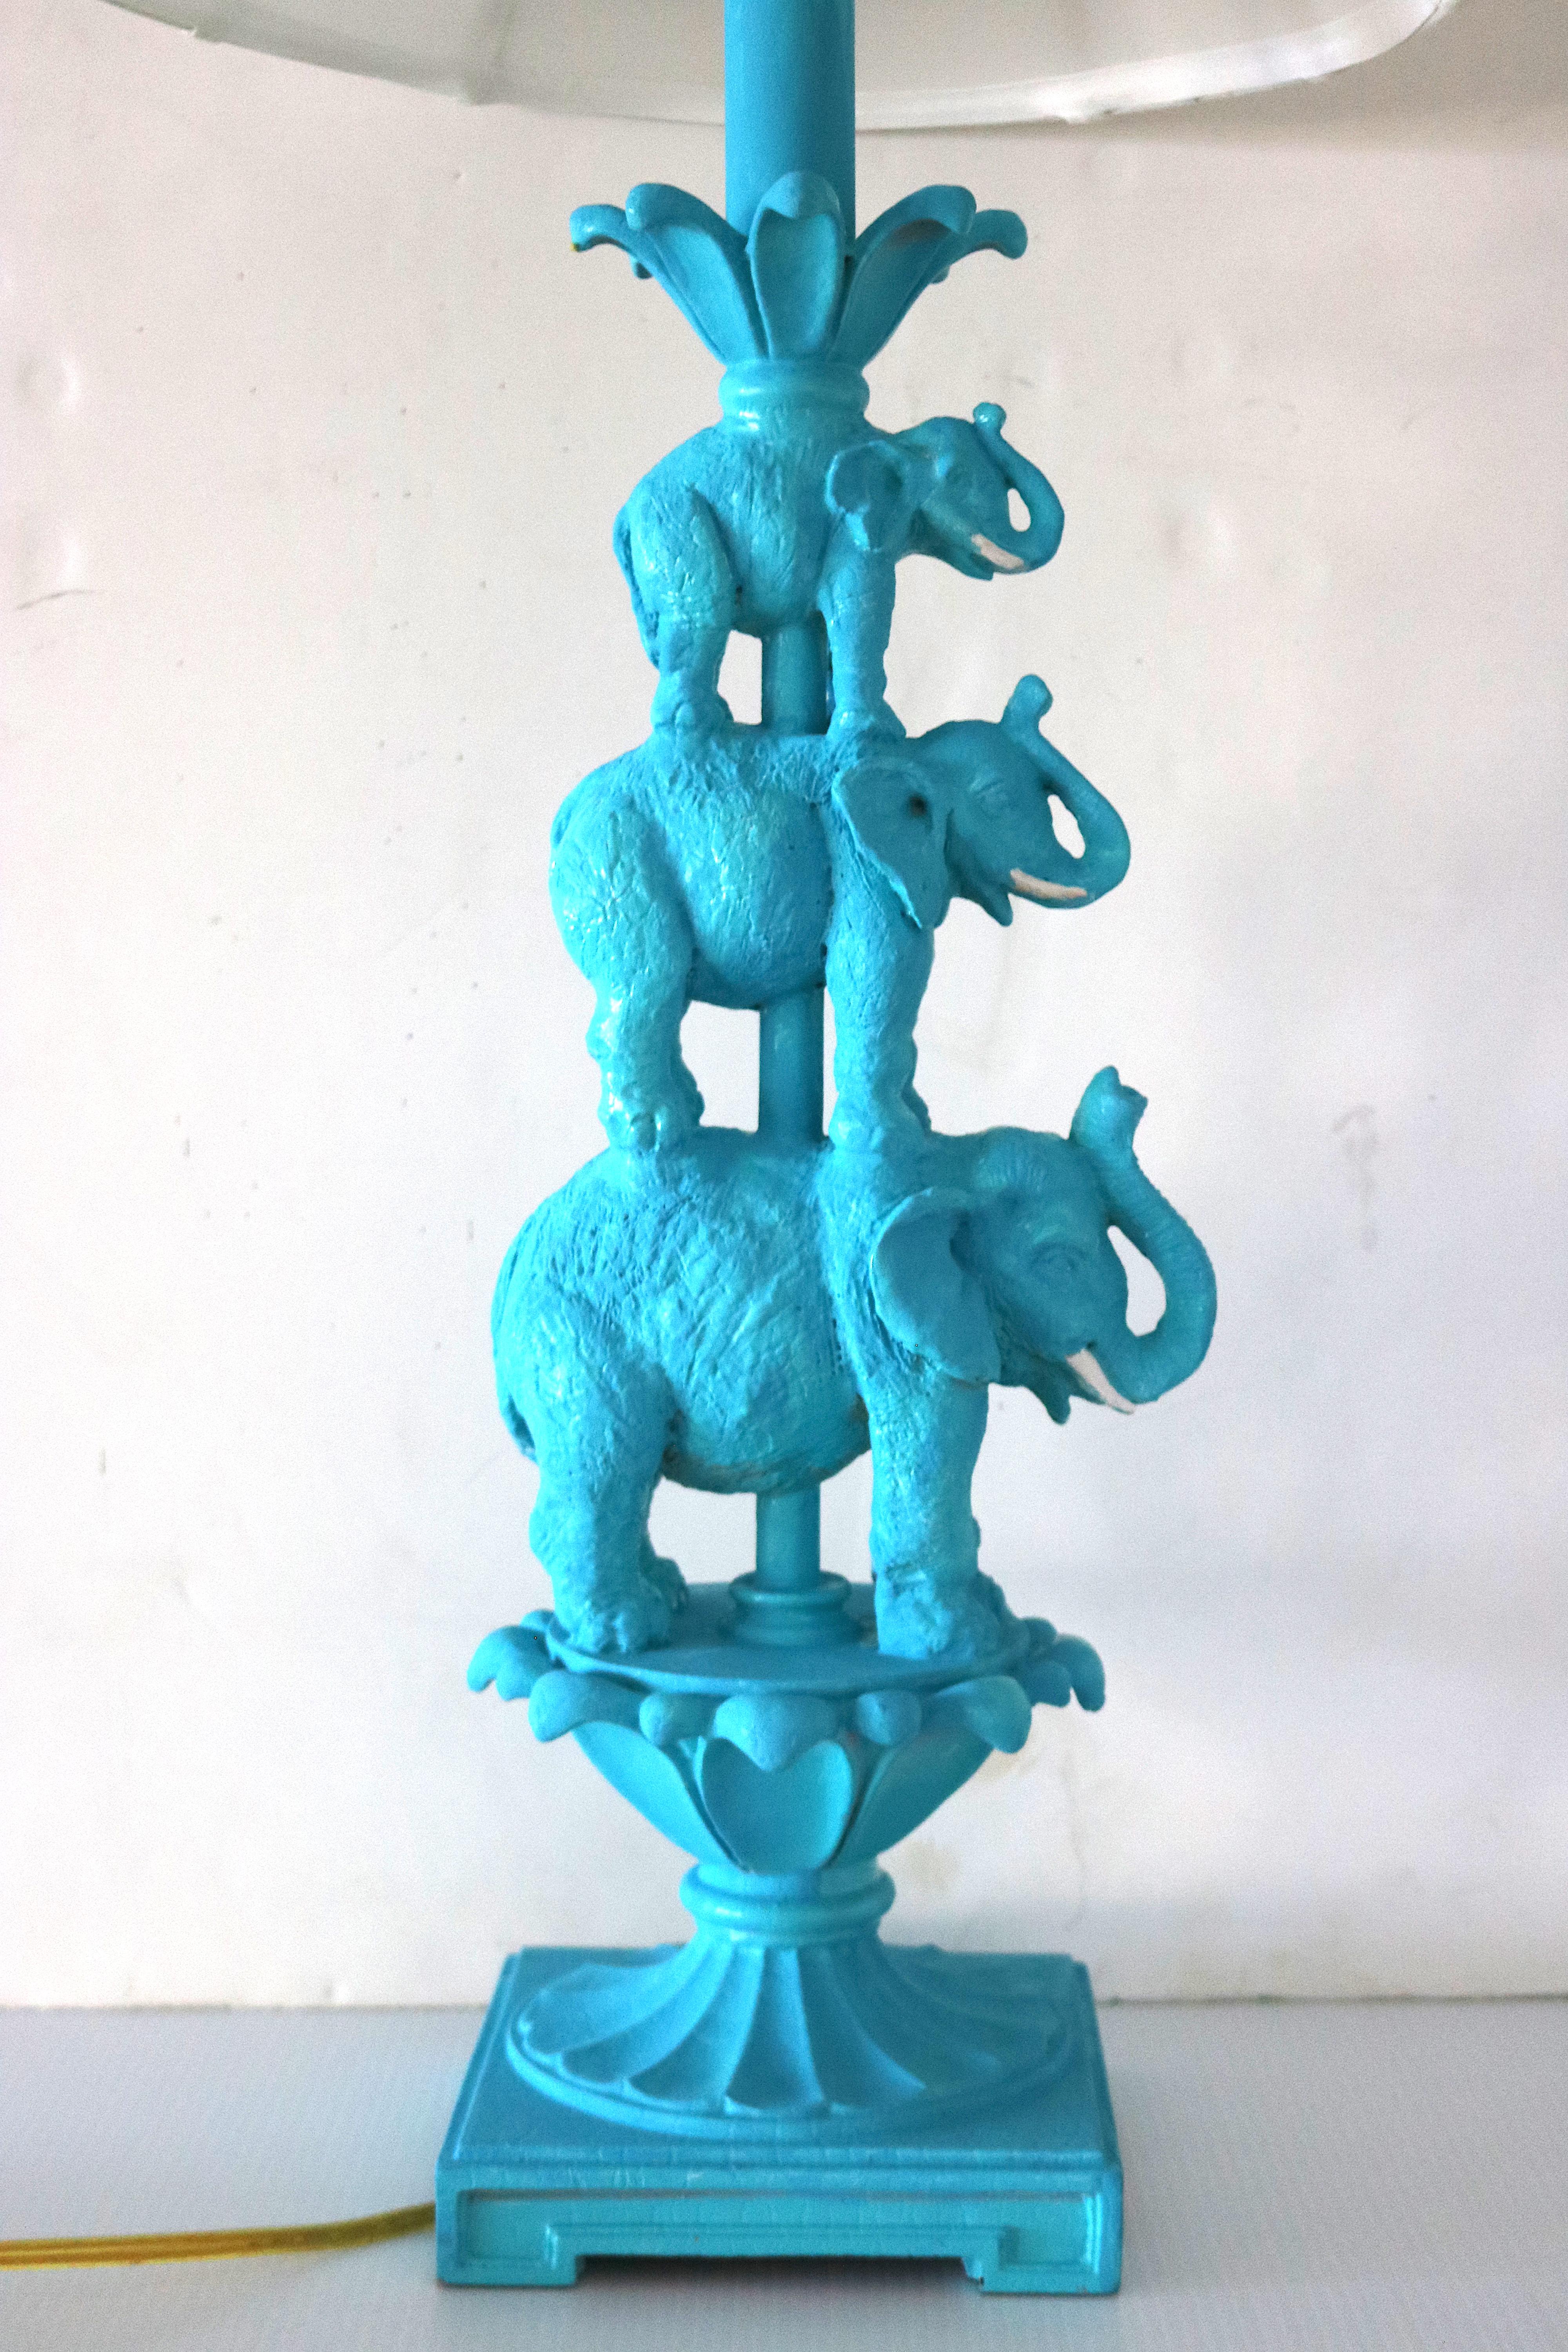 Unique(may be one-of-a-kind) sculptural artisan textured cast elephants stacked-daddy, mommy, baby-trunks up- with a charming decorative design painted turquoise with white painted tusks, a tulip shaped white on white striped lamp shade, a brass